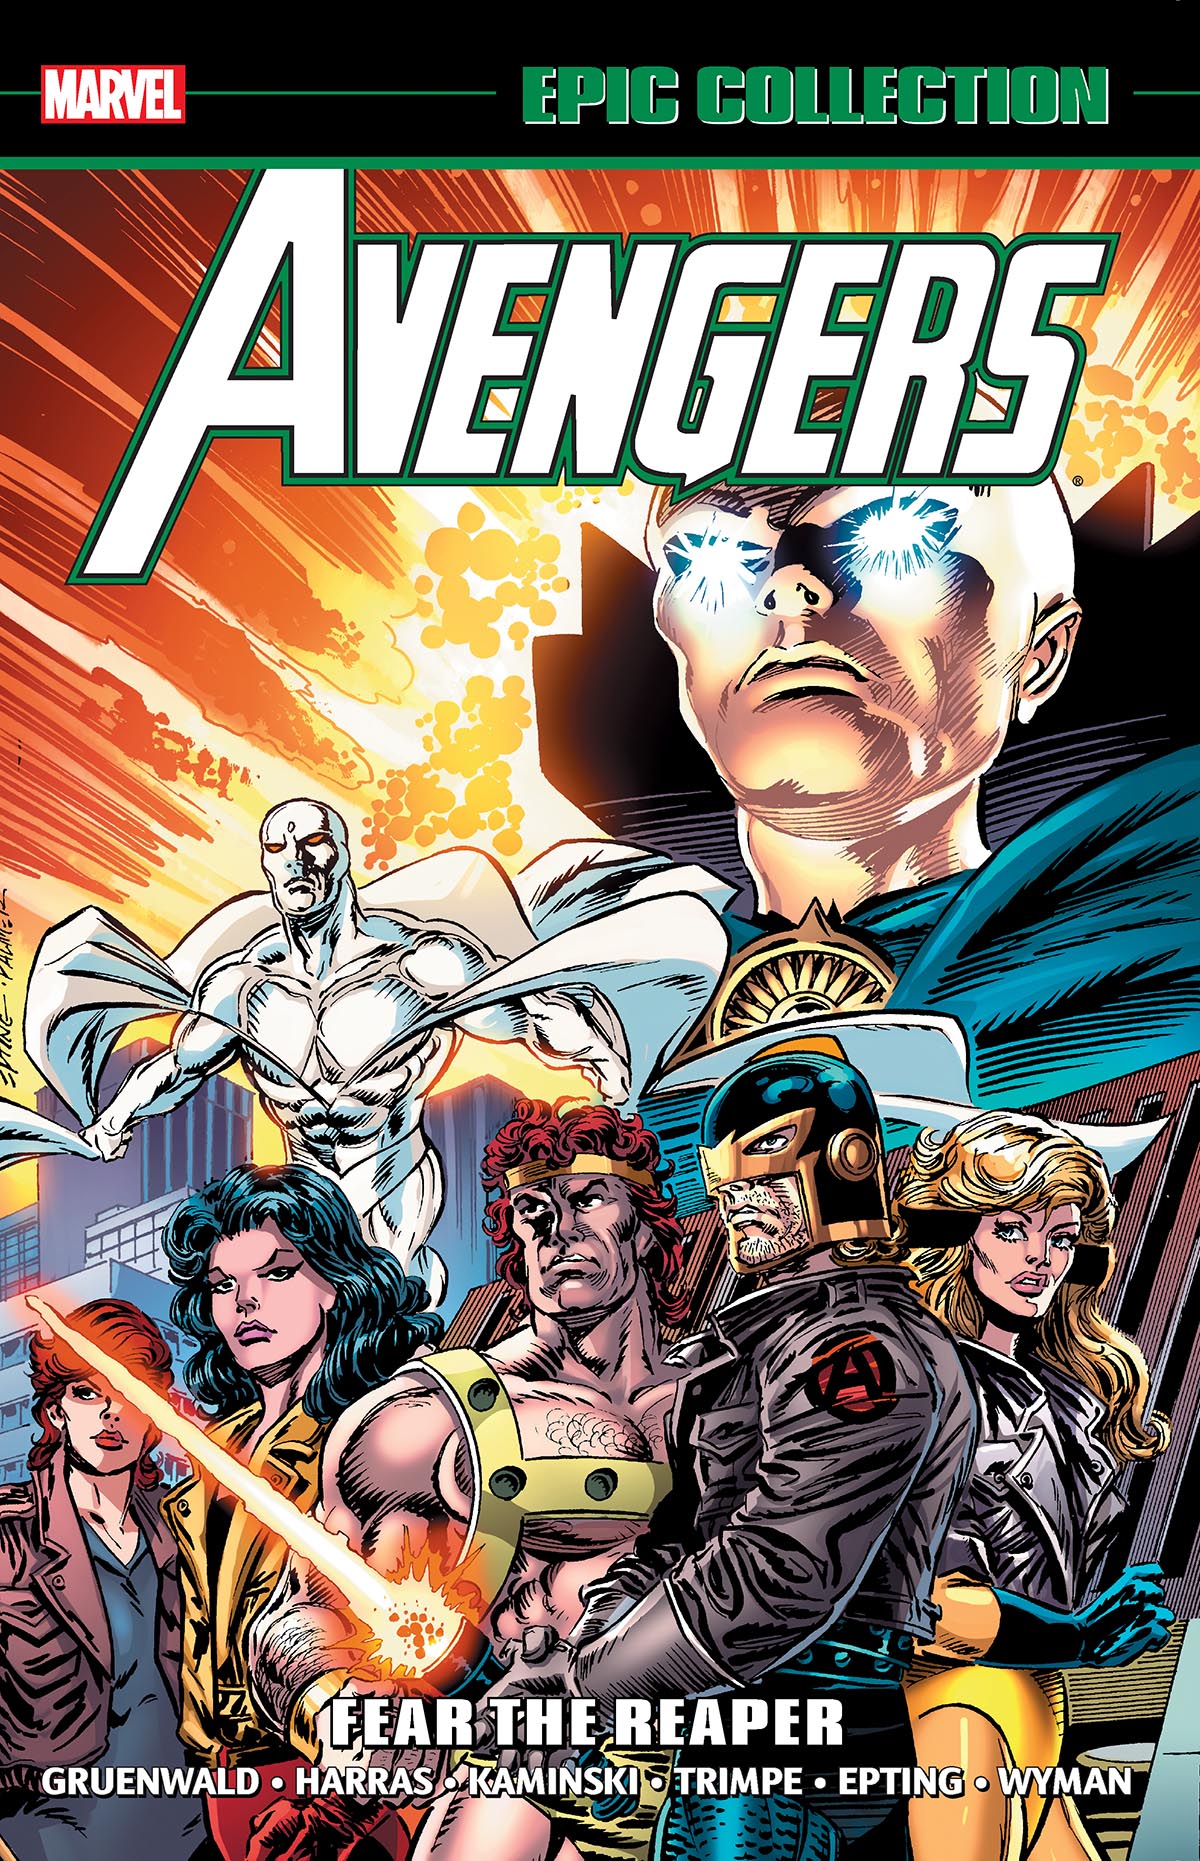 The Avengers Epic Collection Volume 23: Fear The Reaper